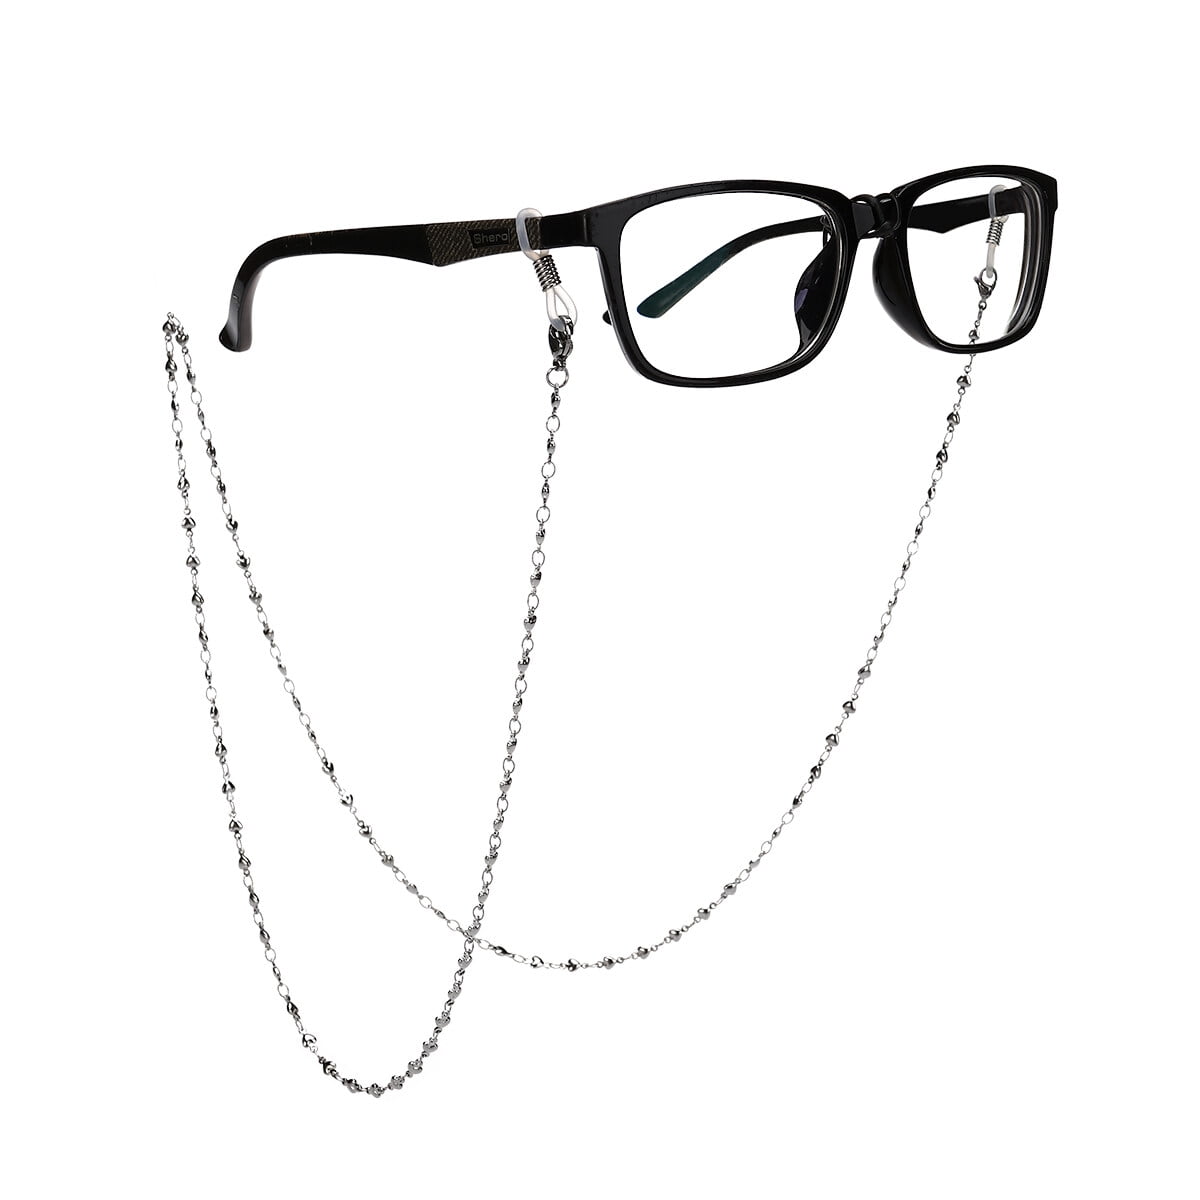 Chainspromax Glasses Chain for Men 28 inch Stainless Cuban Chain Eye Glasses Chains for Women, Size: One size, Silver